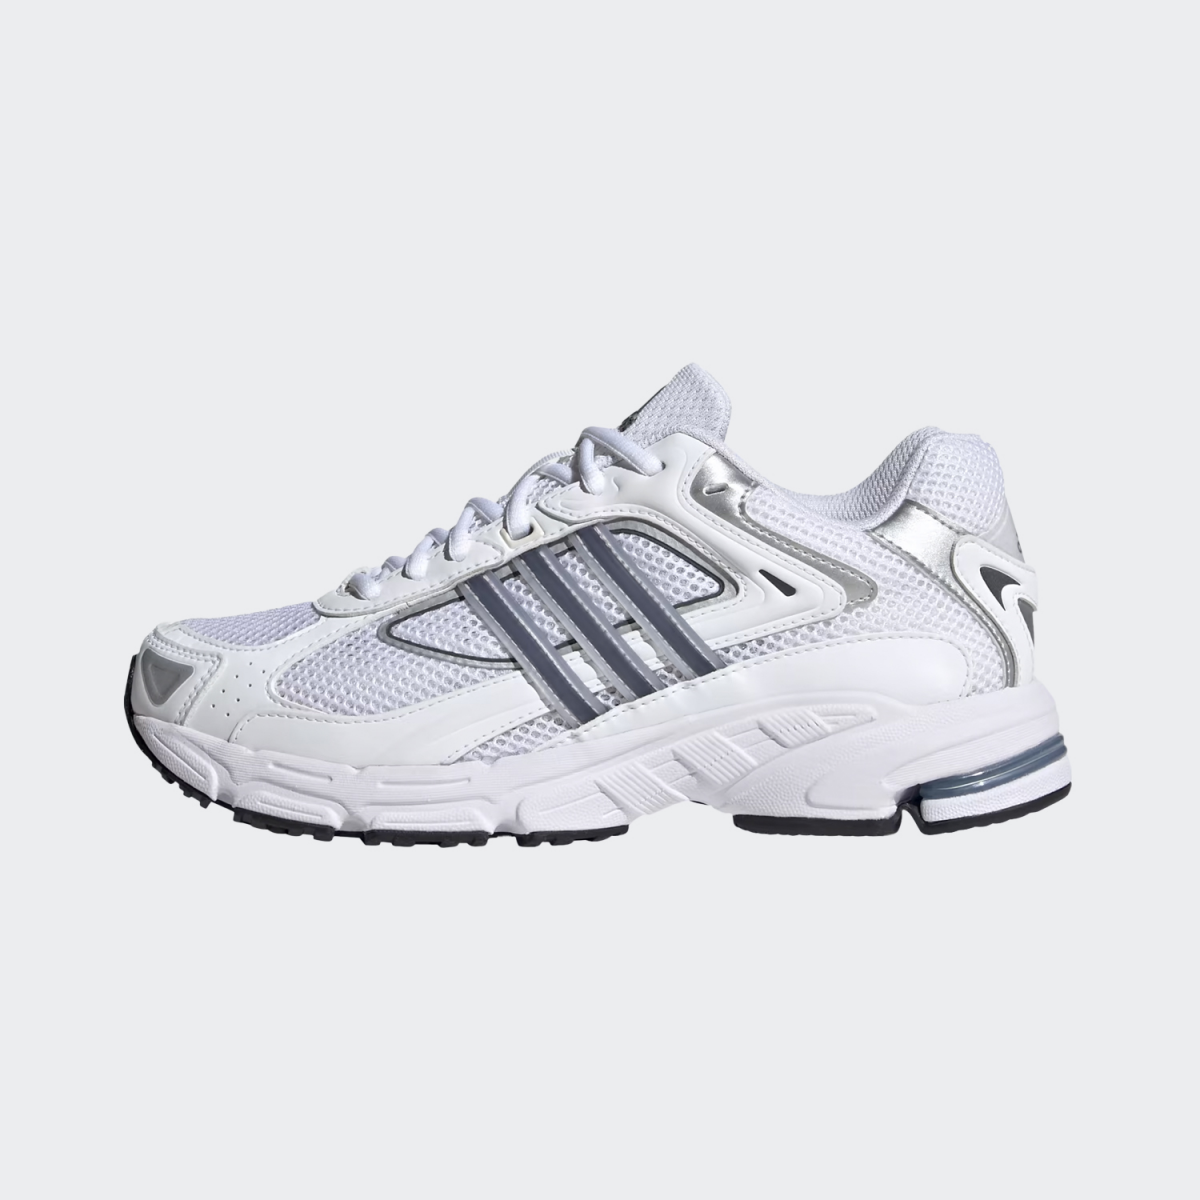 Adidas Response CL sneakers - IE9867_13 | Urban Project